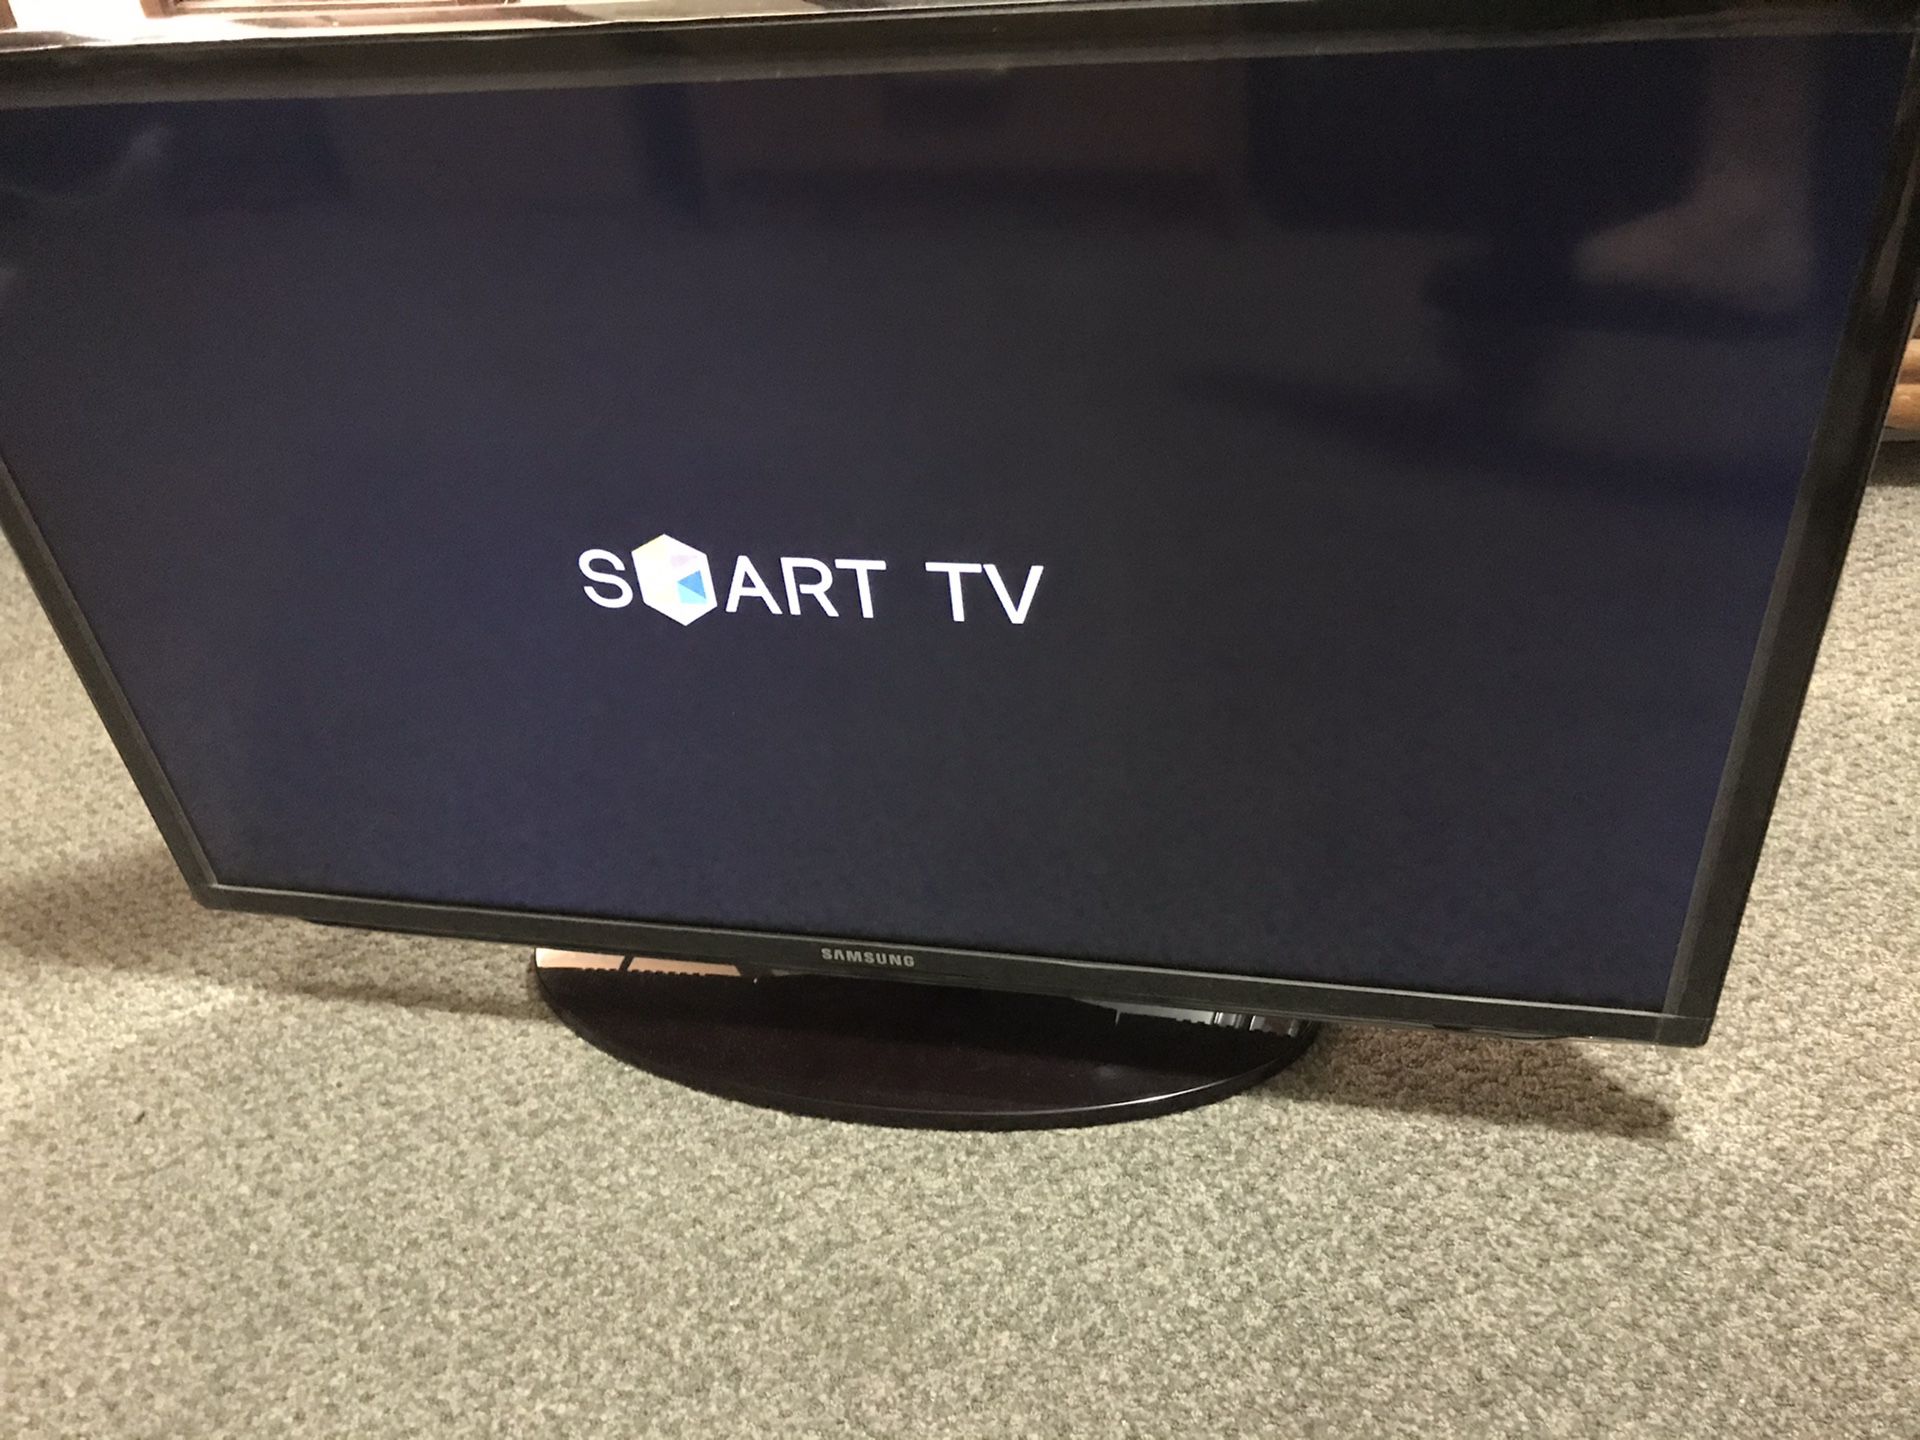 Samsung Smart TV 32” inches